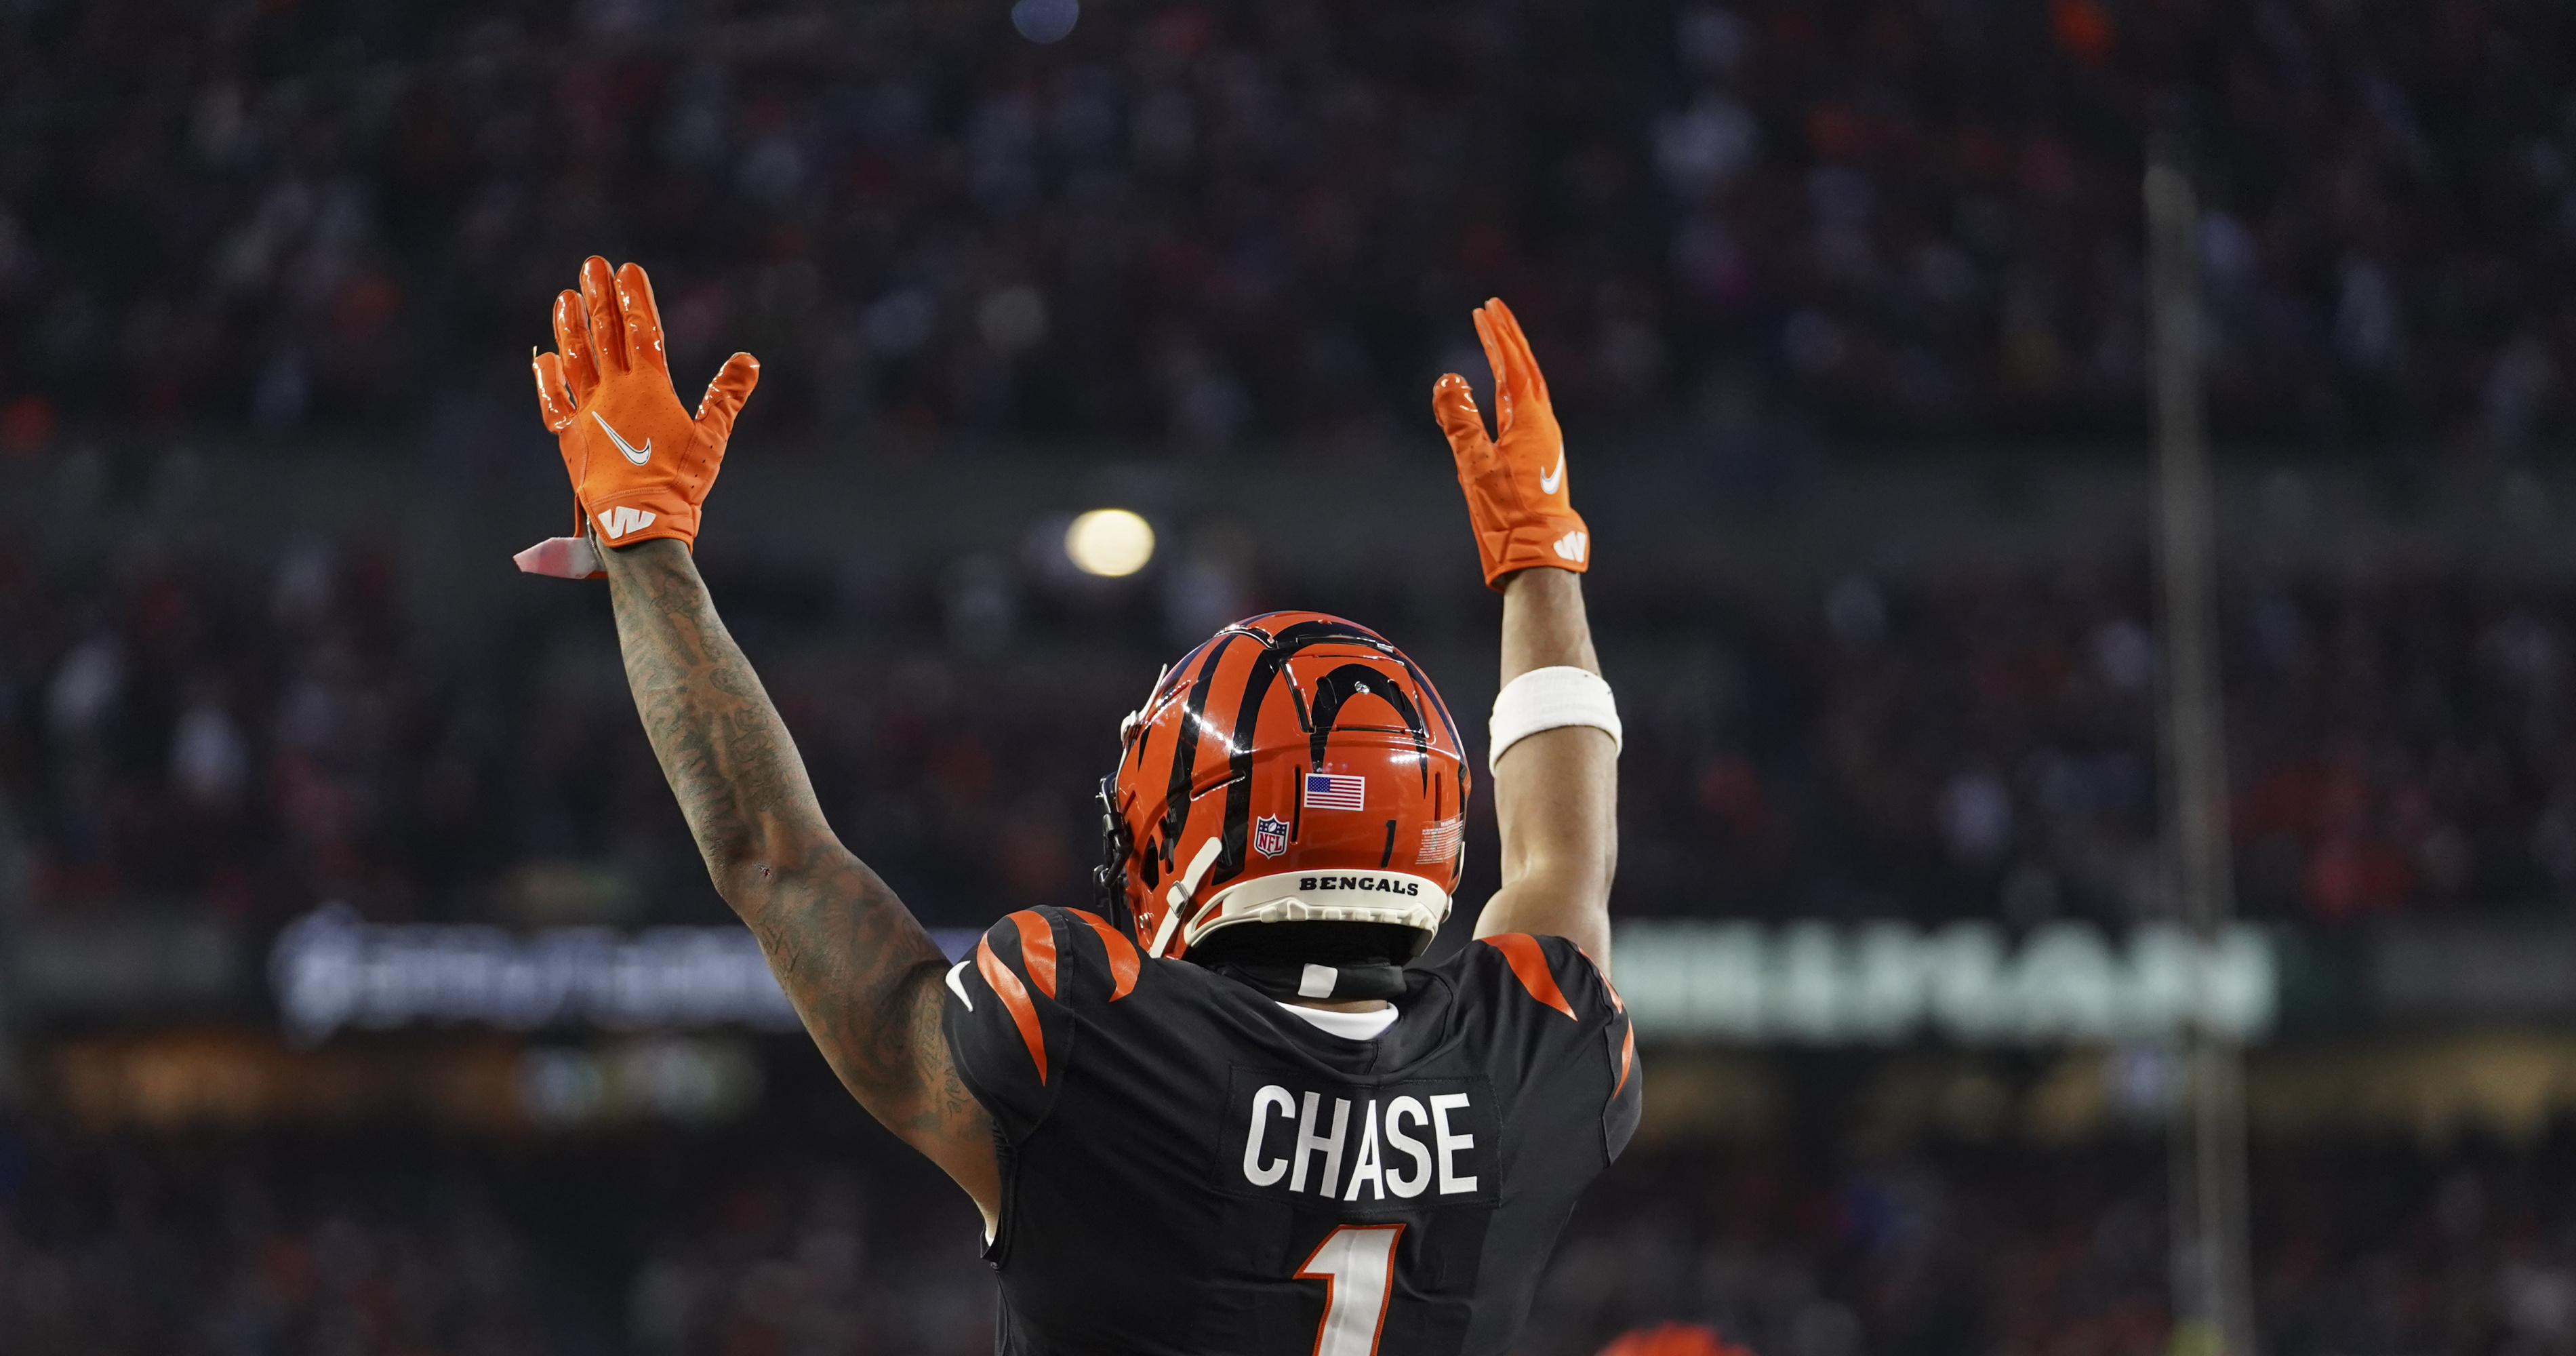 Ja'Marr Chase breaks another Bengals record in 2022 NFL Playoffs